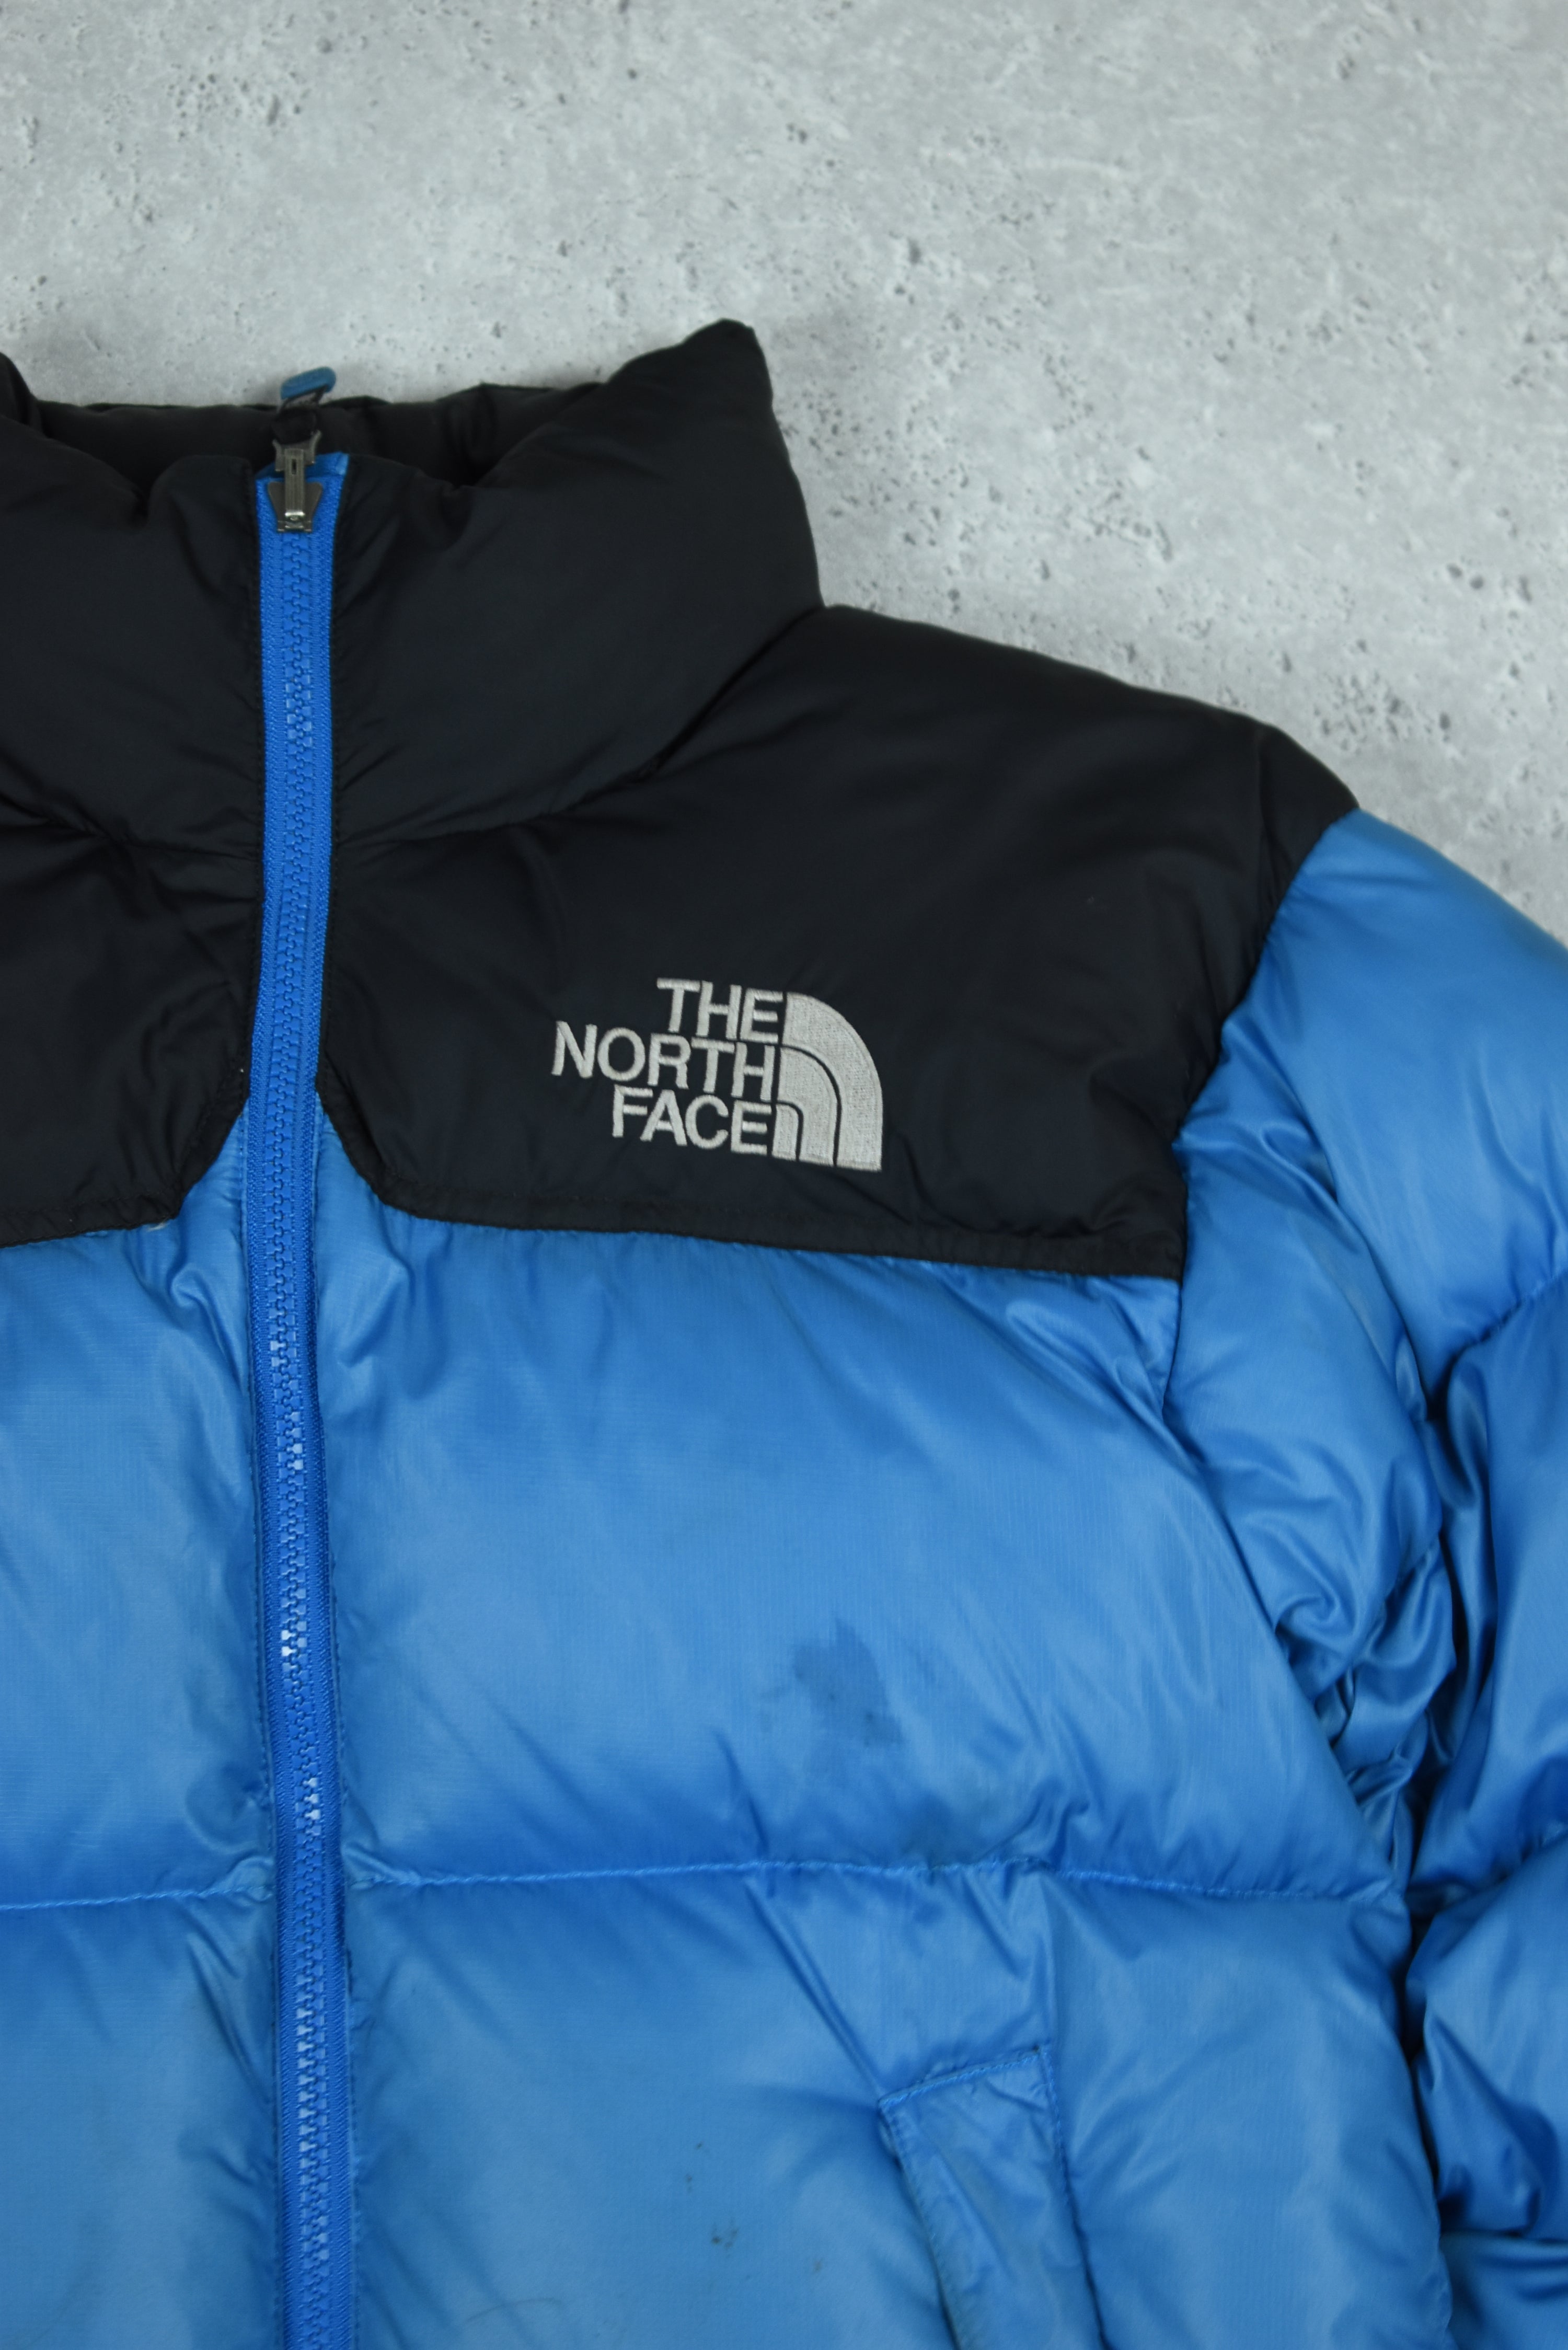 Vintage North Face Nuptse 700 Puffer Blue Small